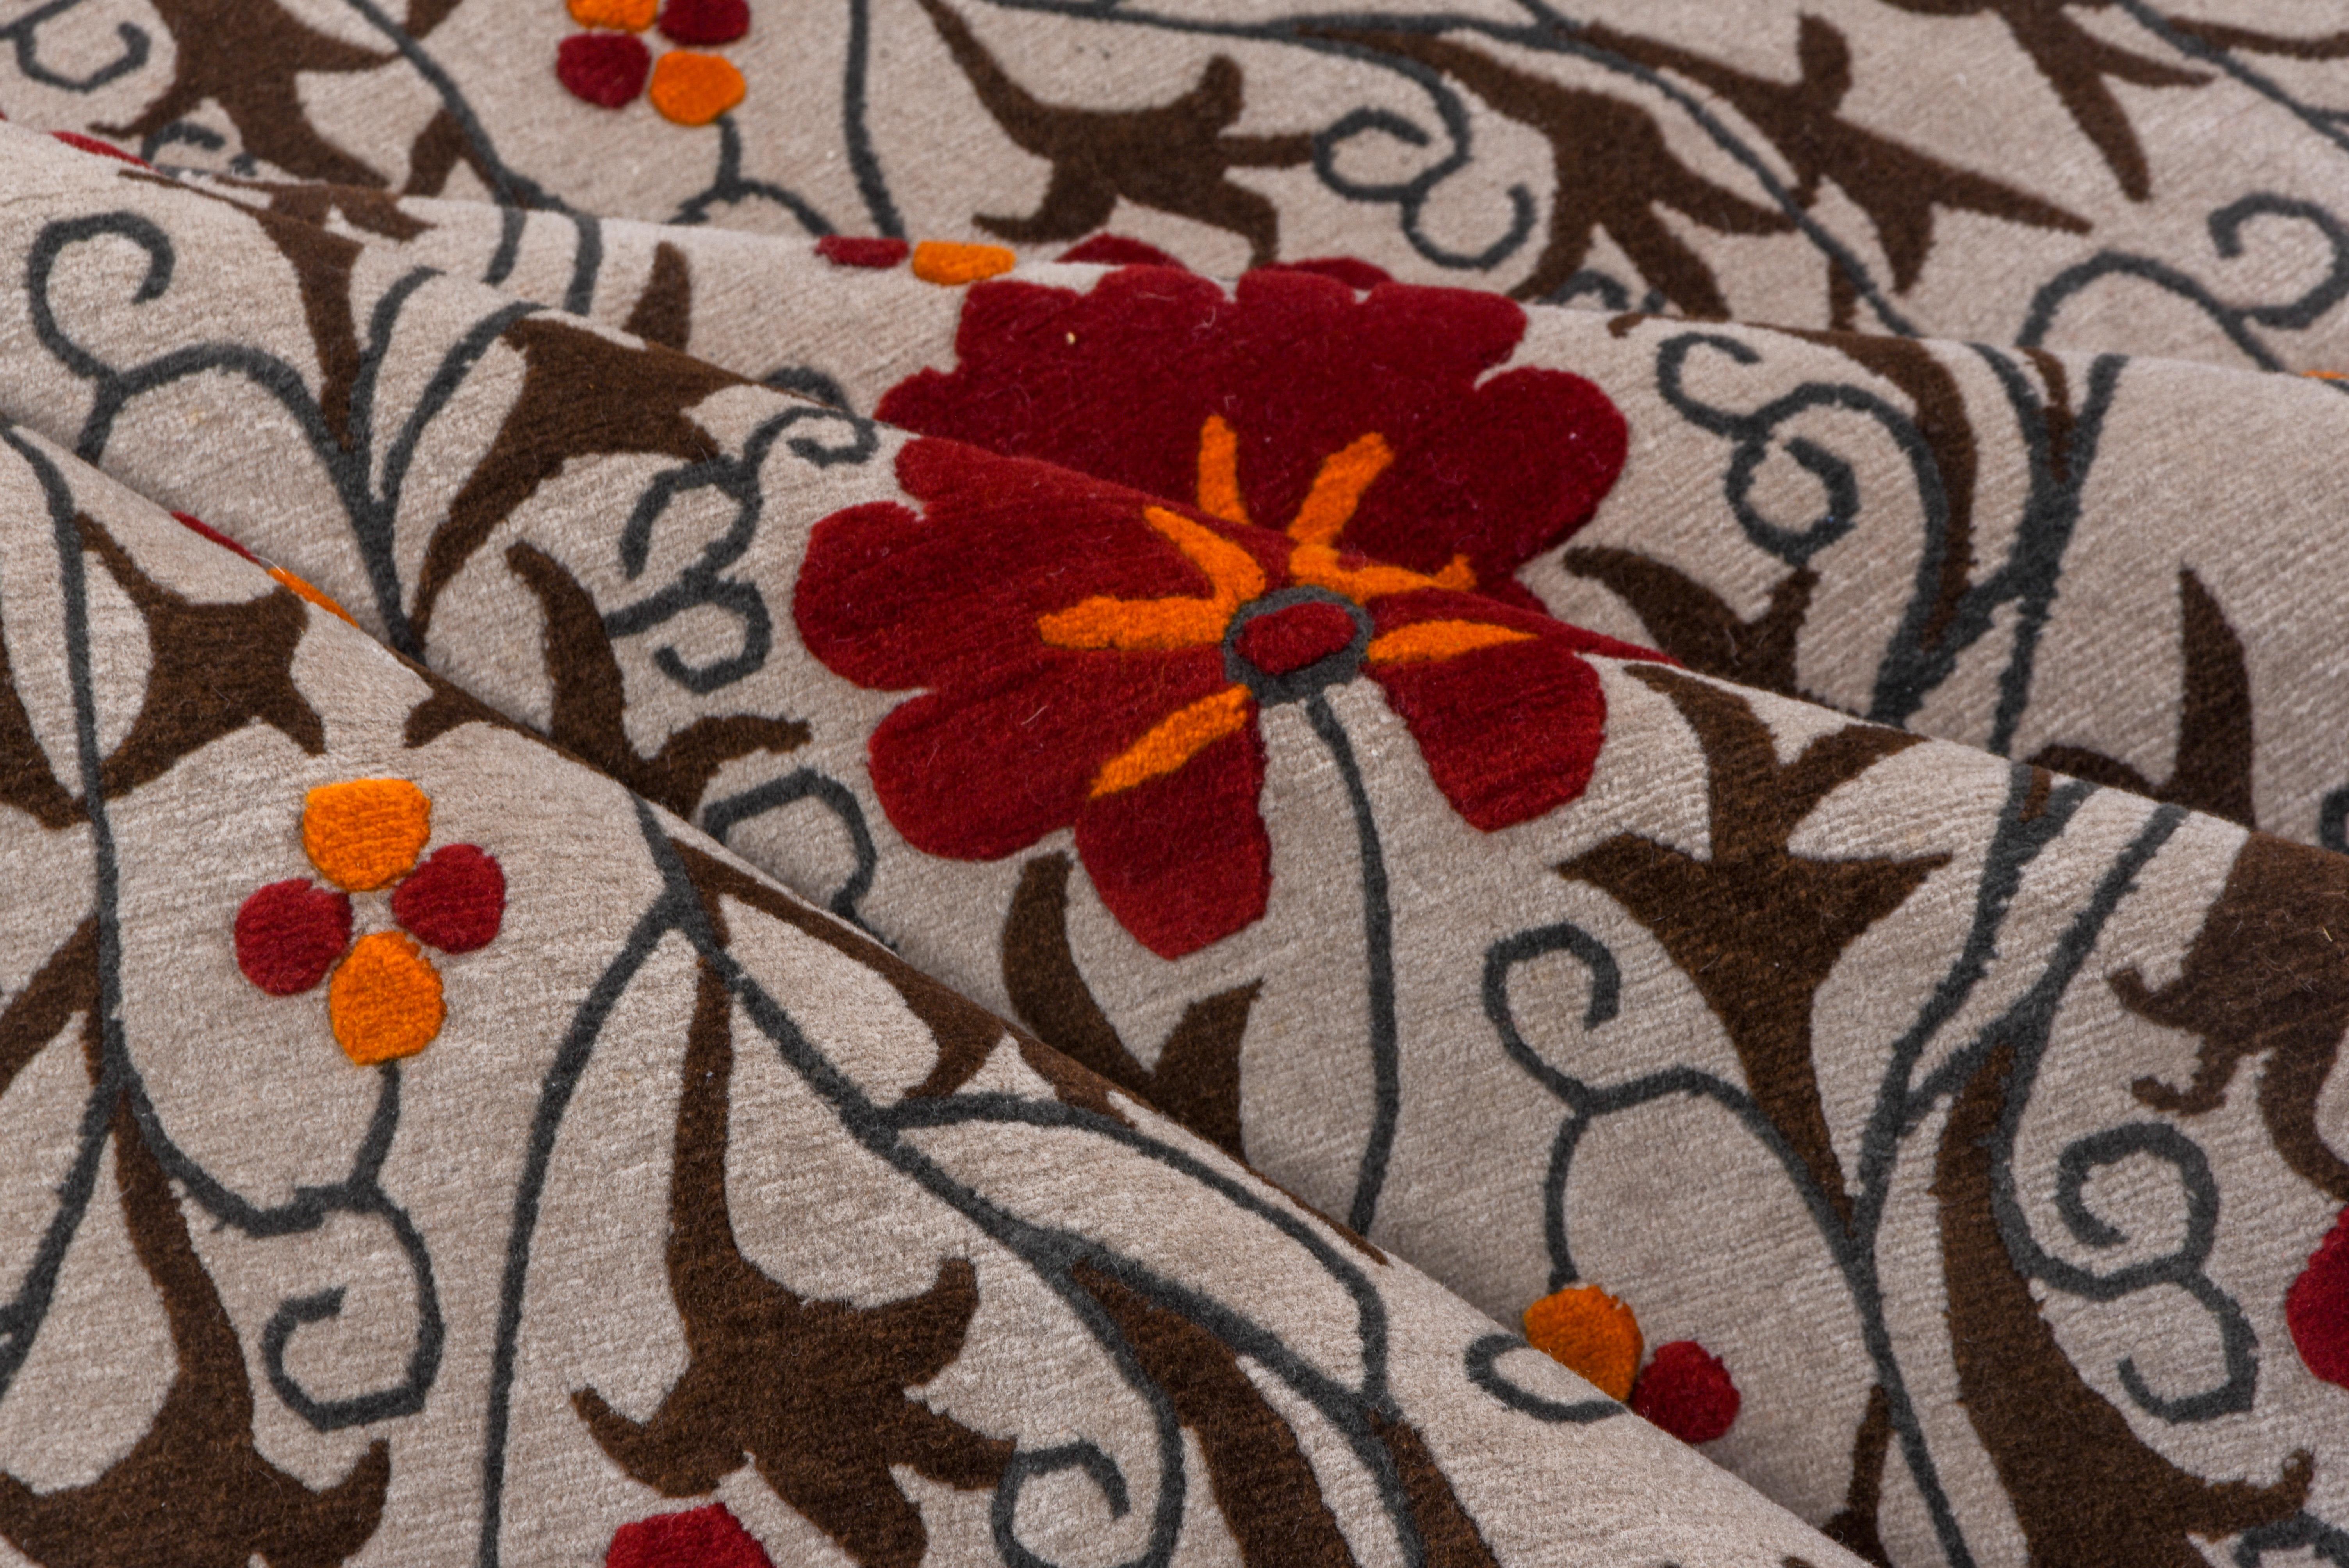 The off-white, borderless ground shows a vertically reversing repeat of red flowers and slender, barbed leaves in a style resembling Uzbek Suzani embroideries. Looks like a giant textile with rigorous execution. Square size makes it particularly